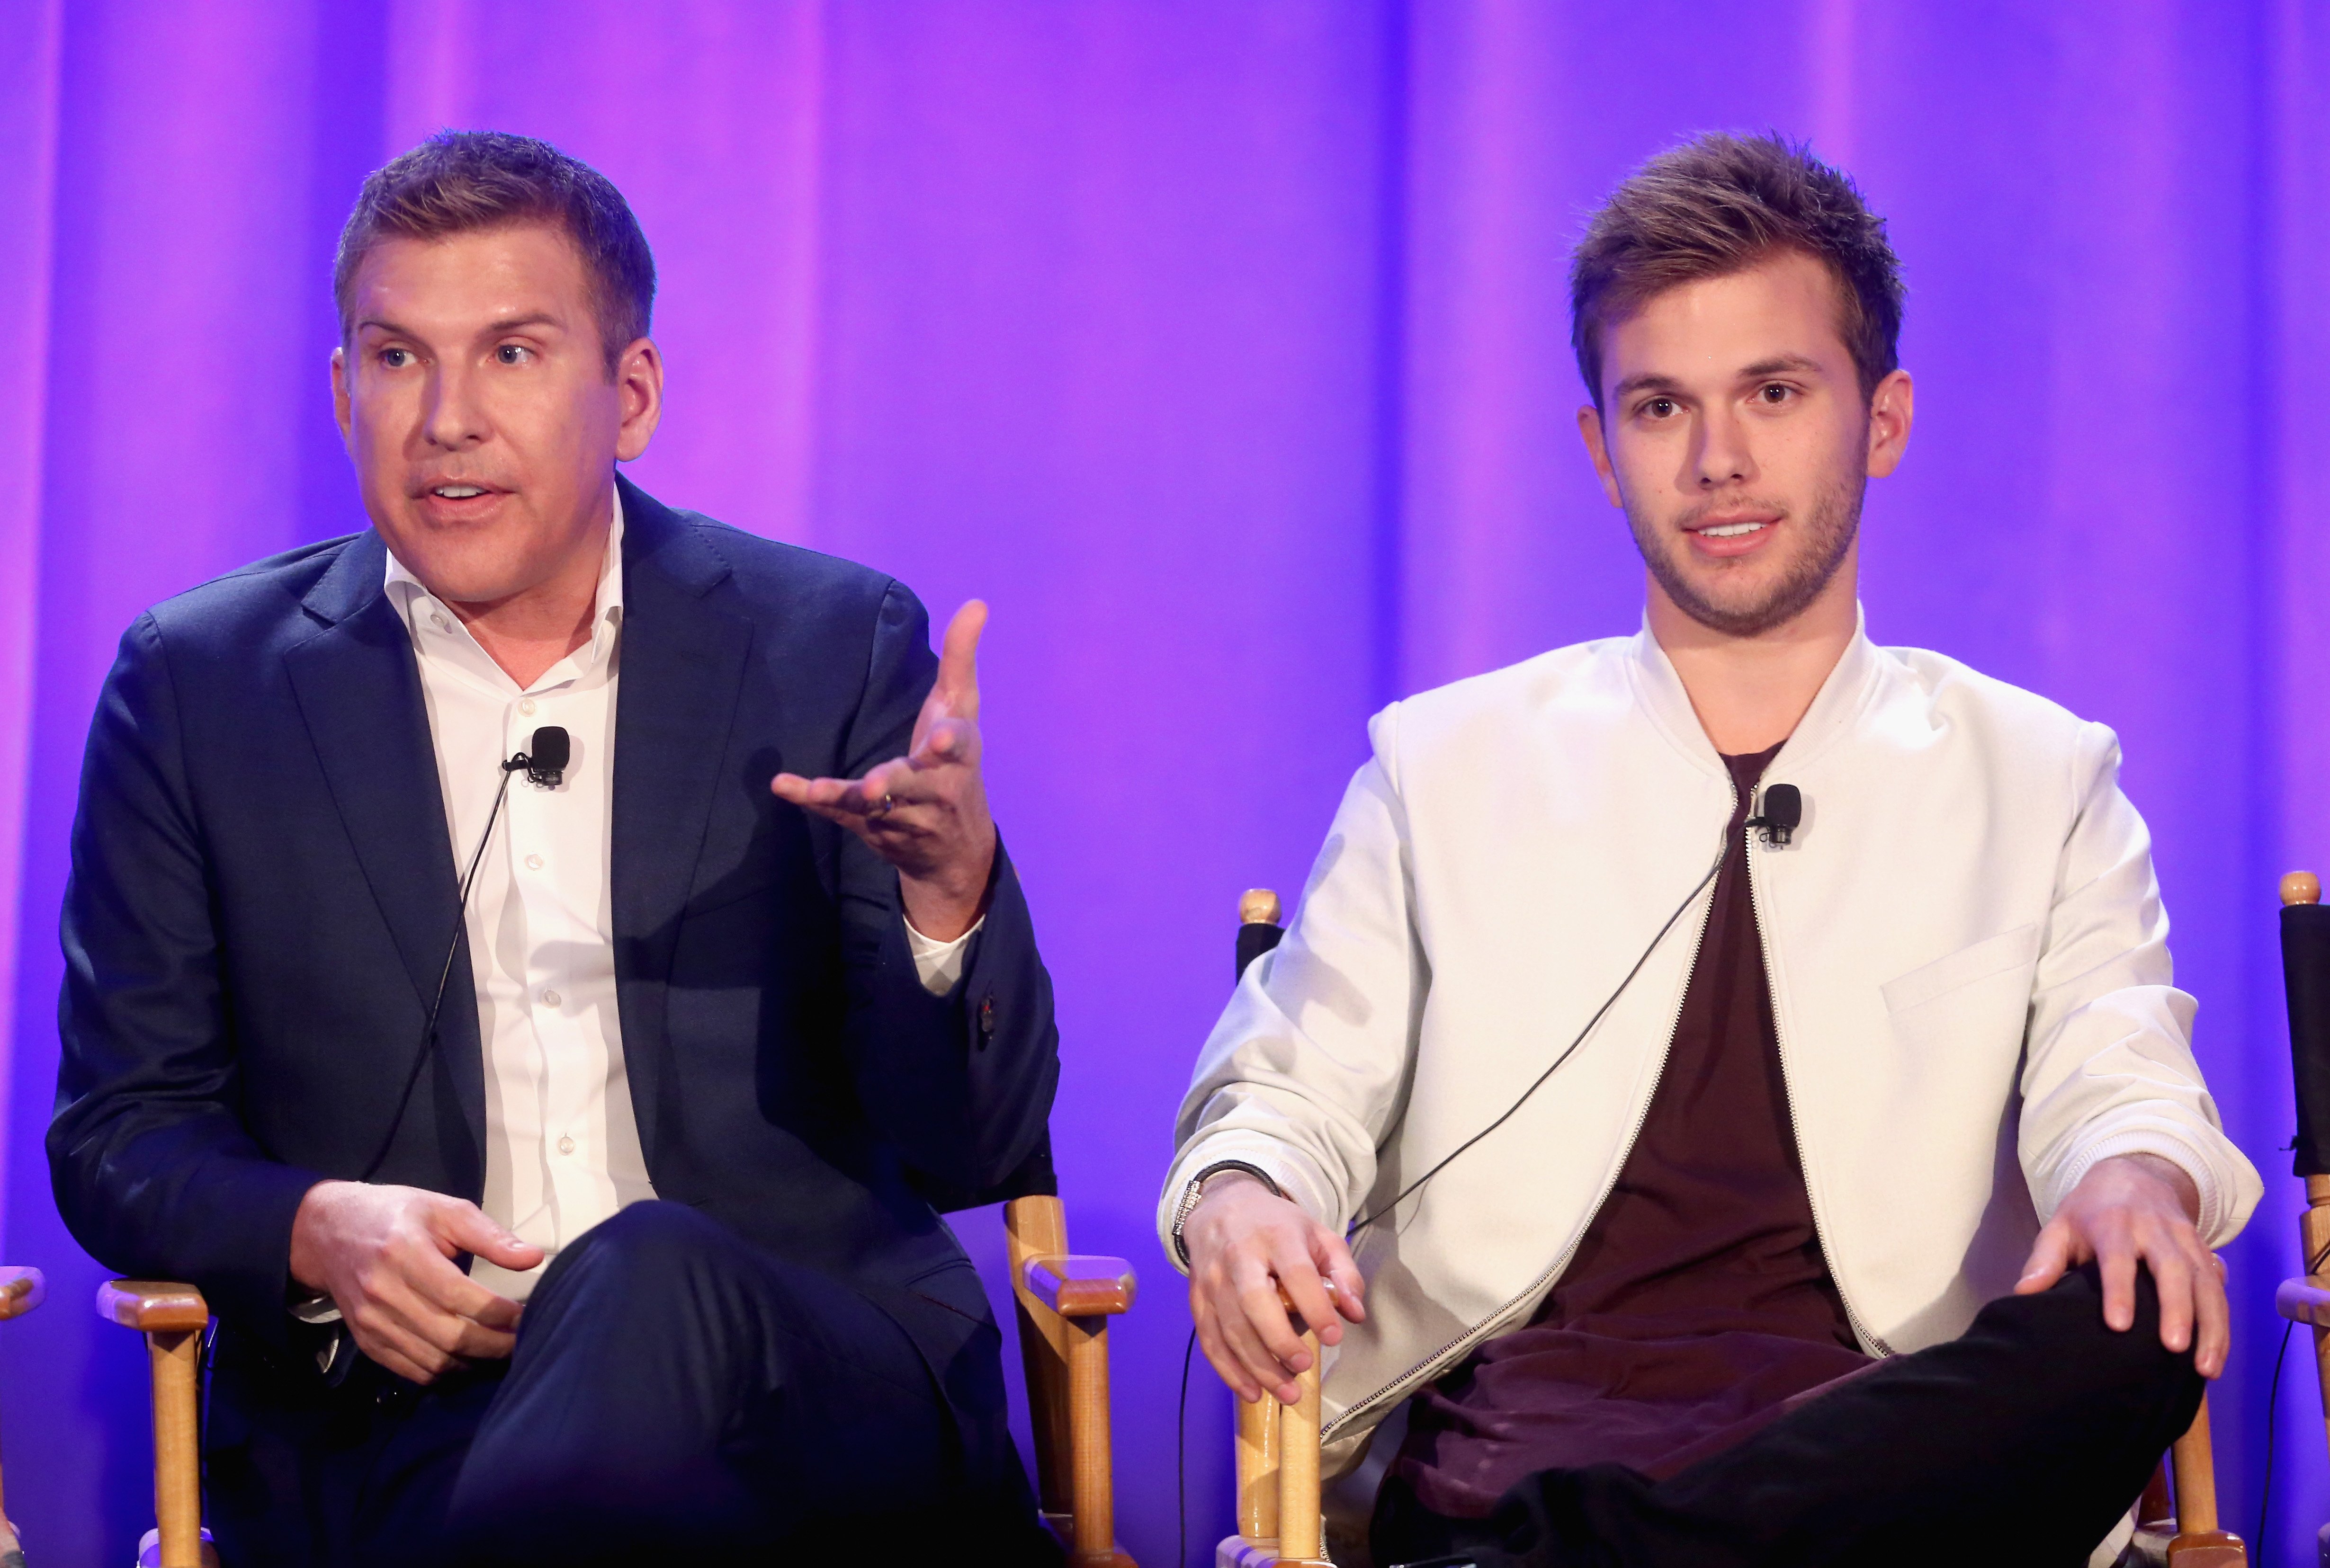 Todd Chrisley and Chase Chrisley at the 2016 NBCUniversal Summer Press Day on April 1, 2016 | Photo: GettyImages